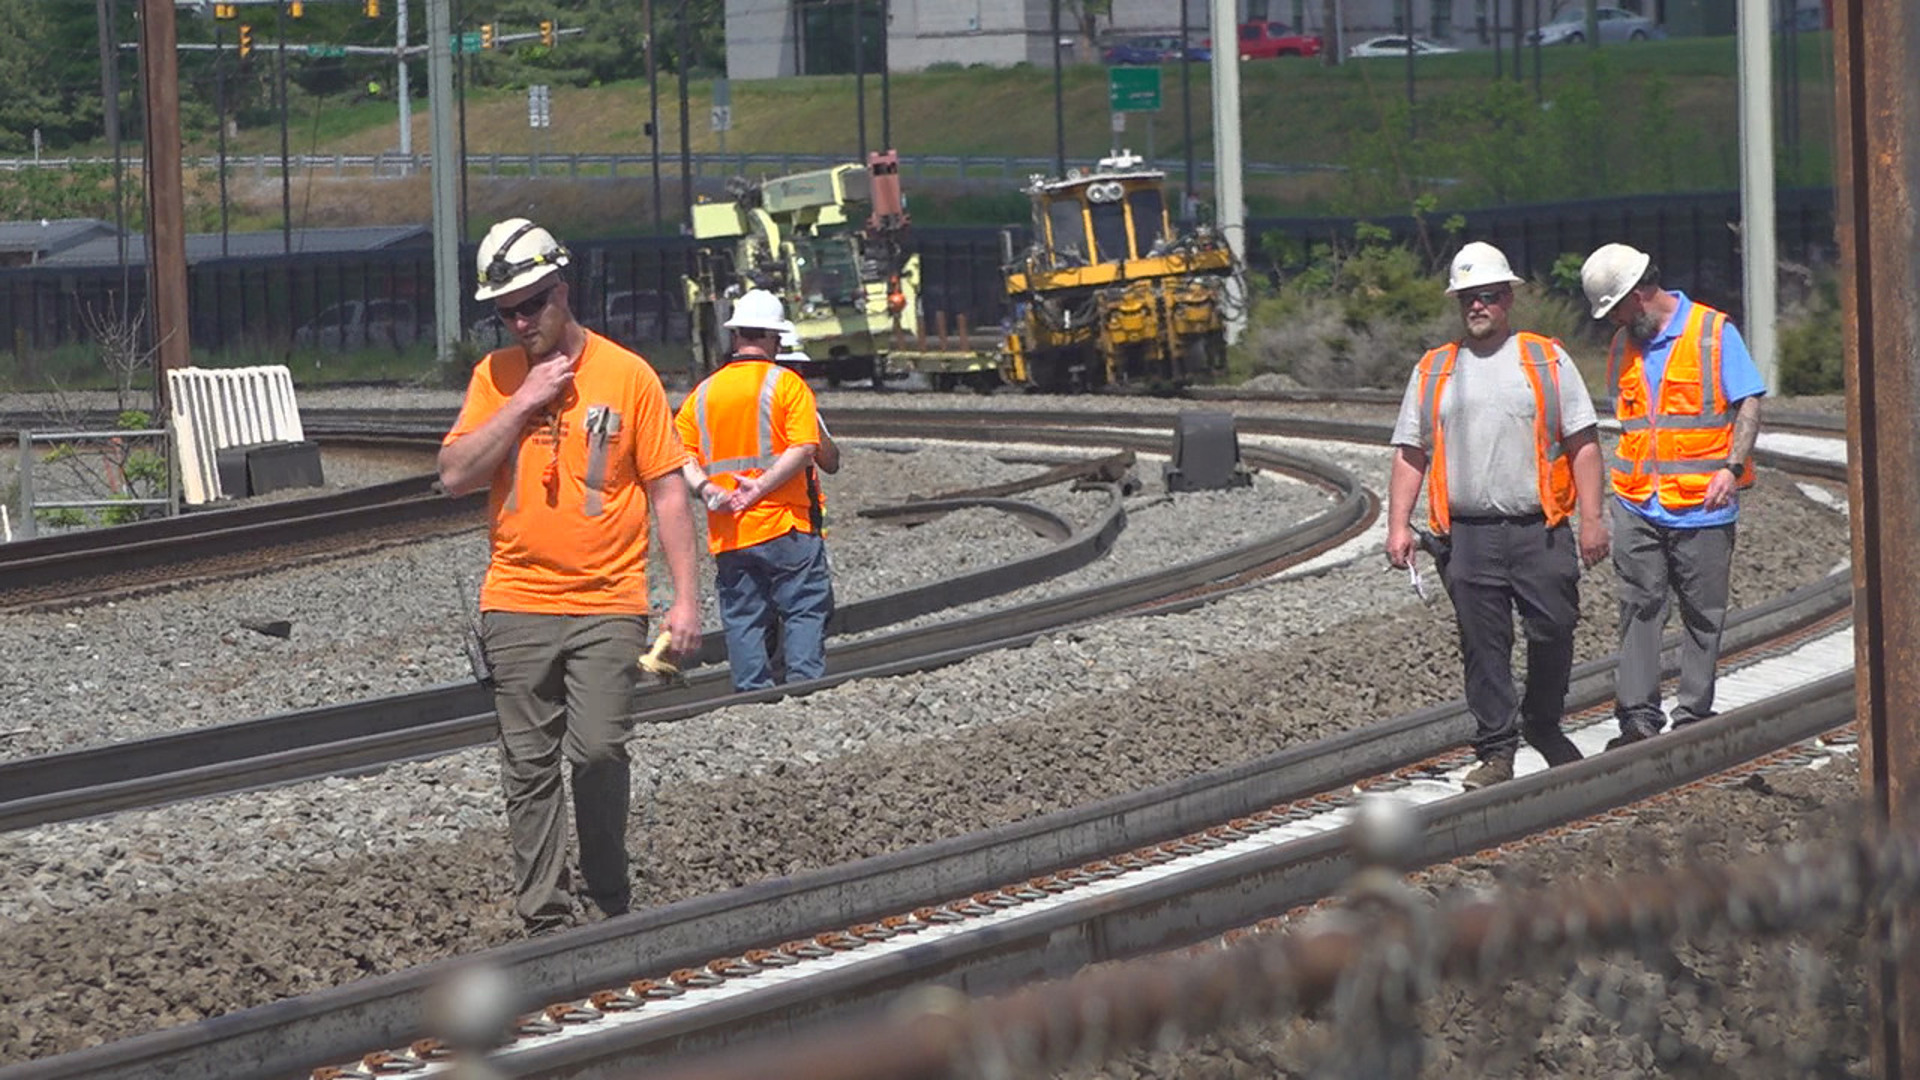 Amtrak crews say they entered the second phase of their major track repair project two weeks ahead of schedule.